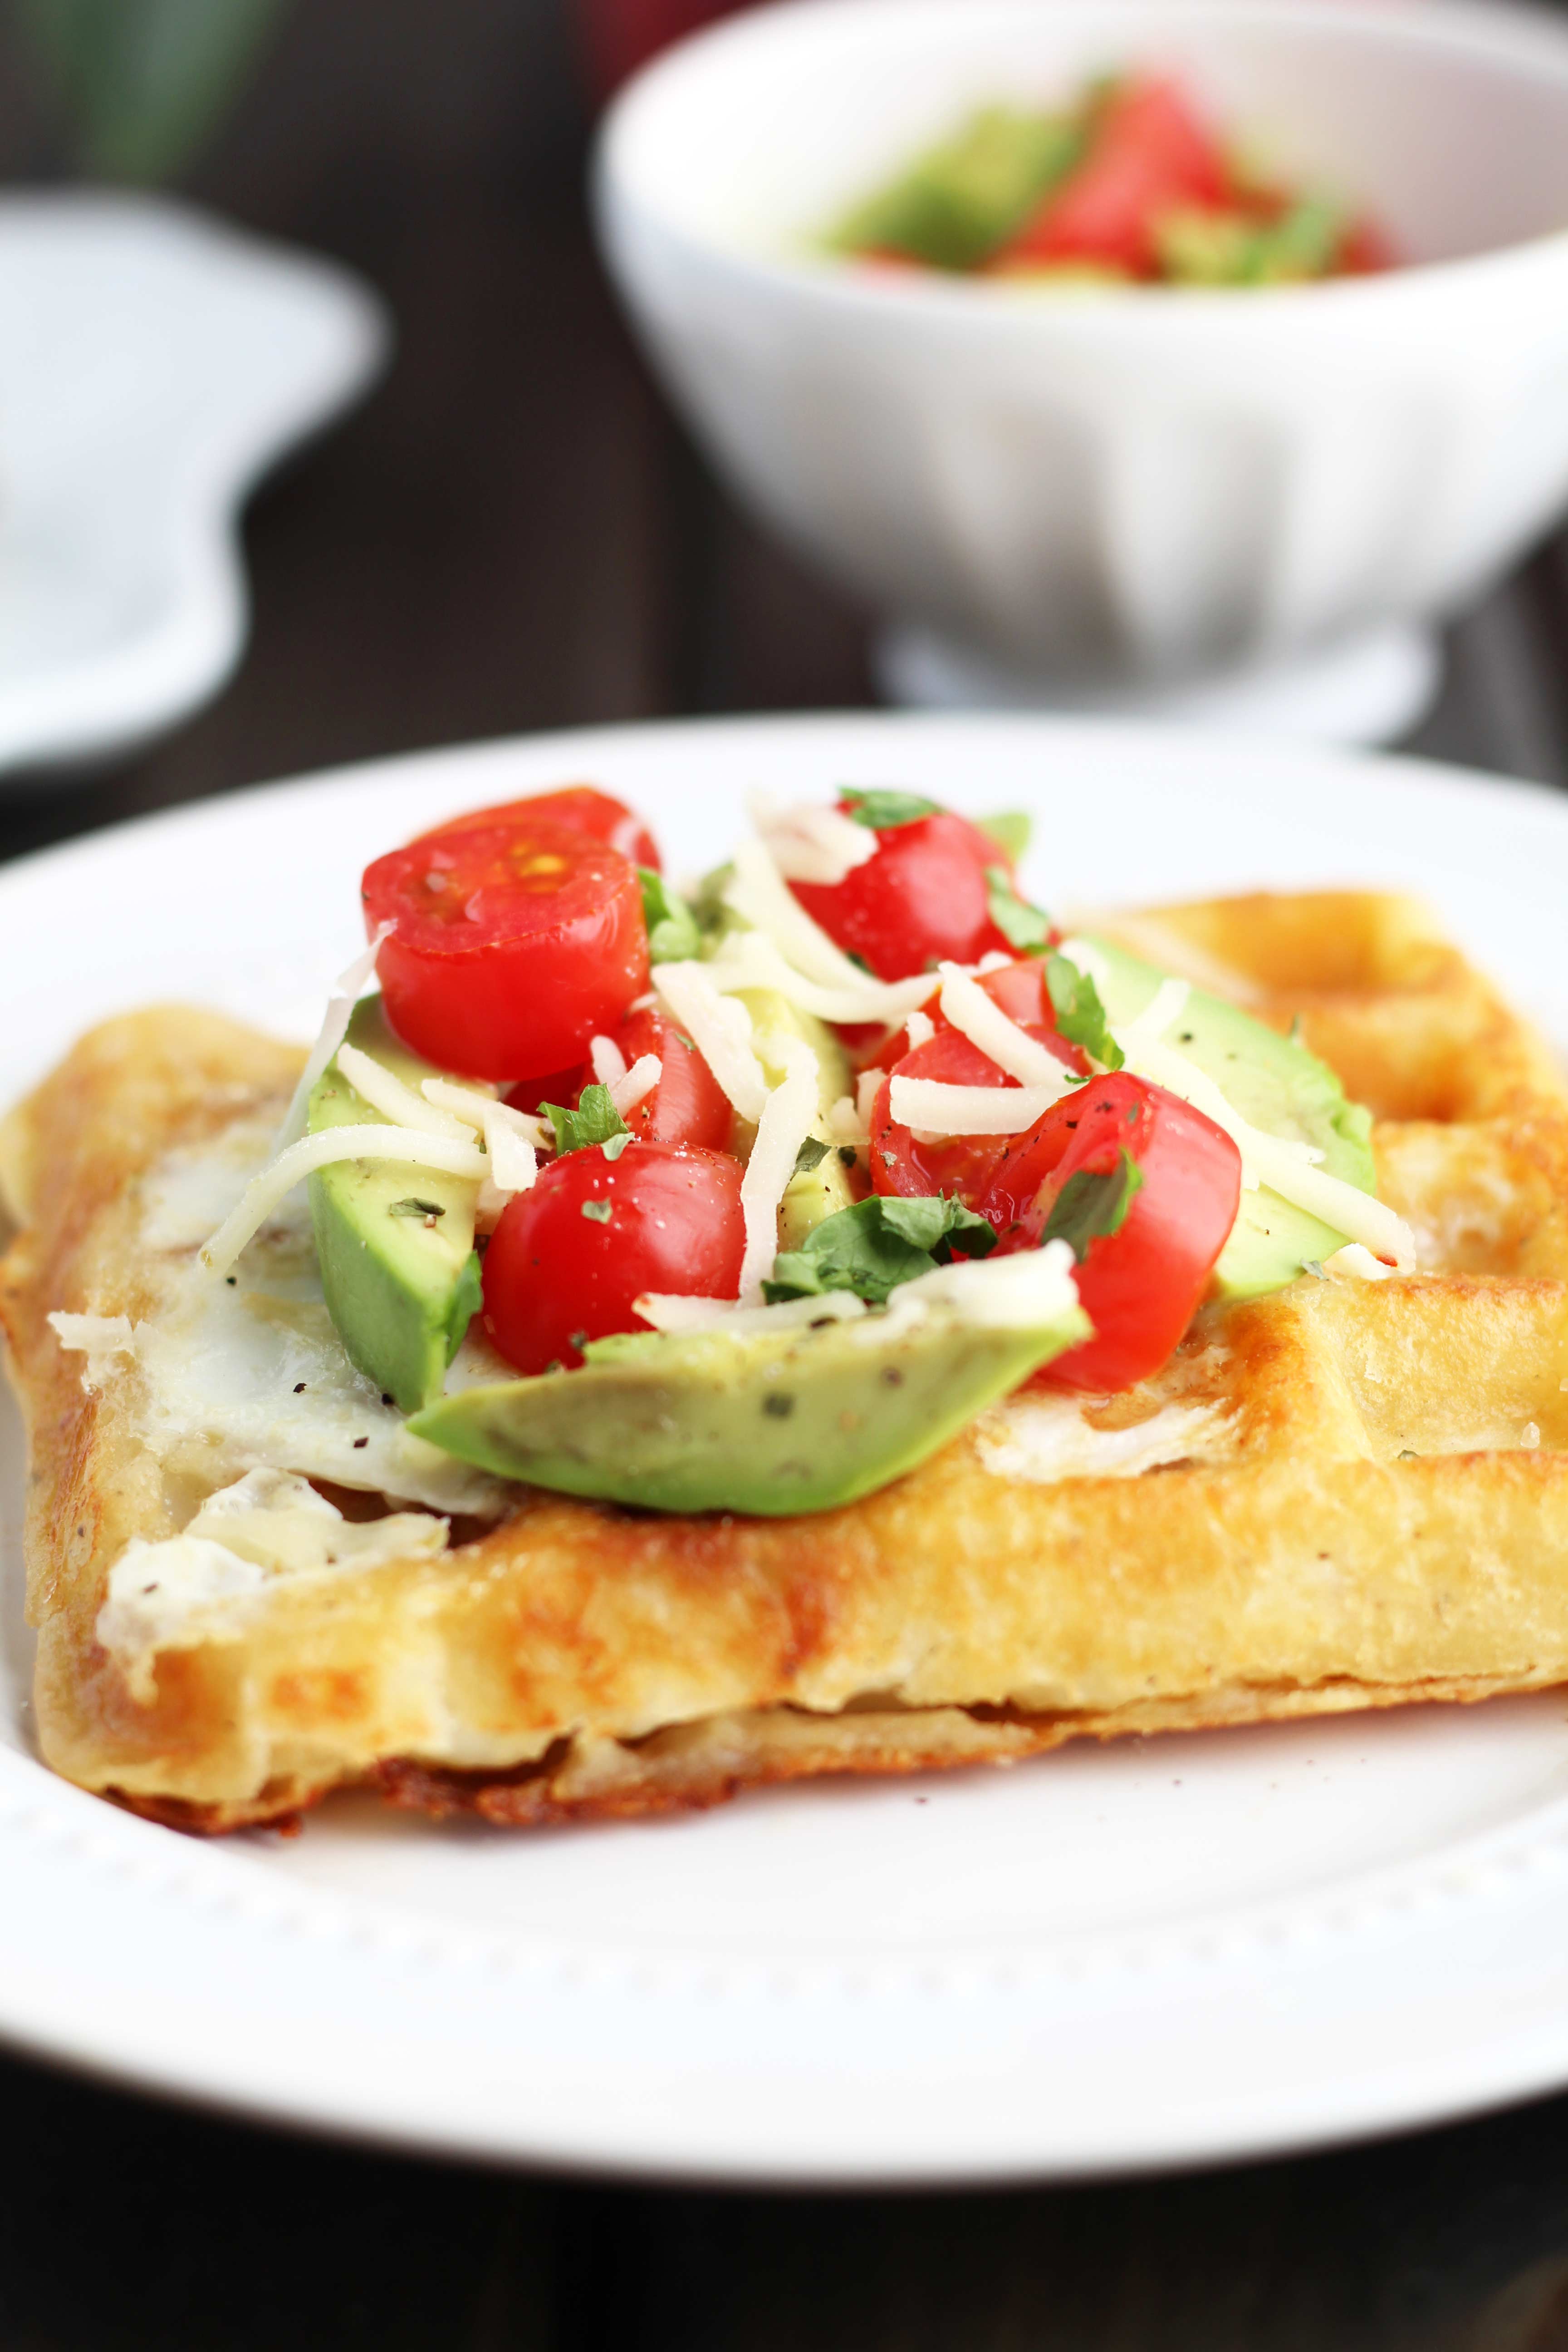 Hashbrown-Waffle-Egg-in-the-Holes with Tomato Avocado Salsa